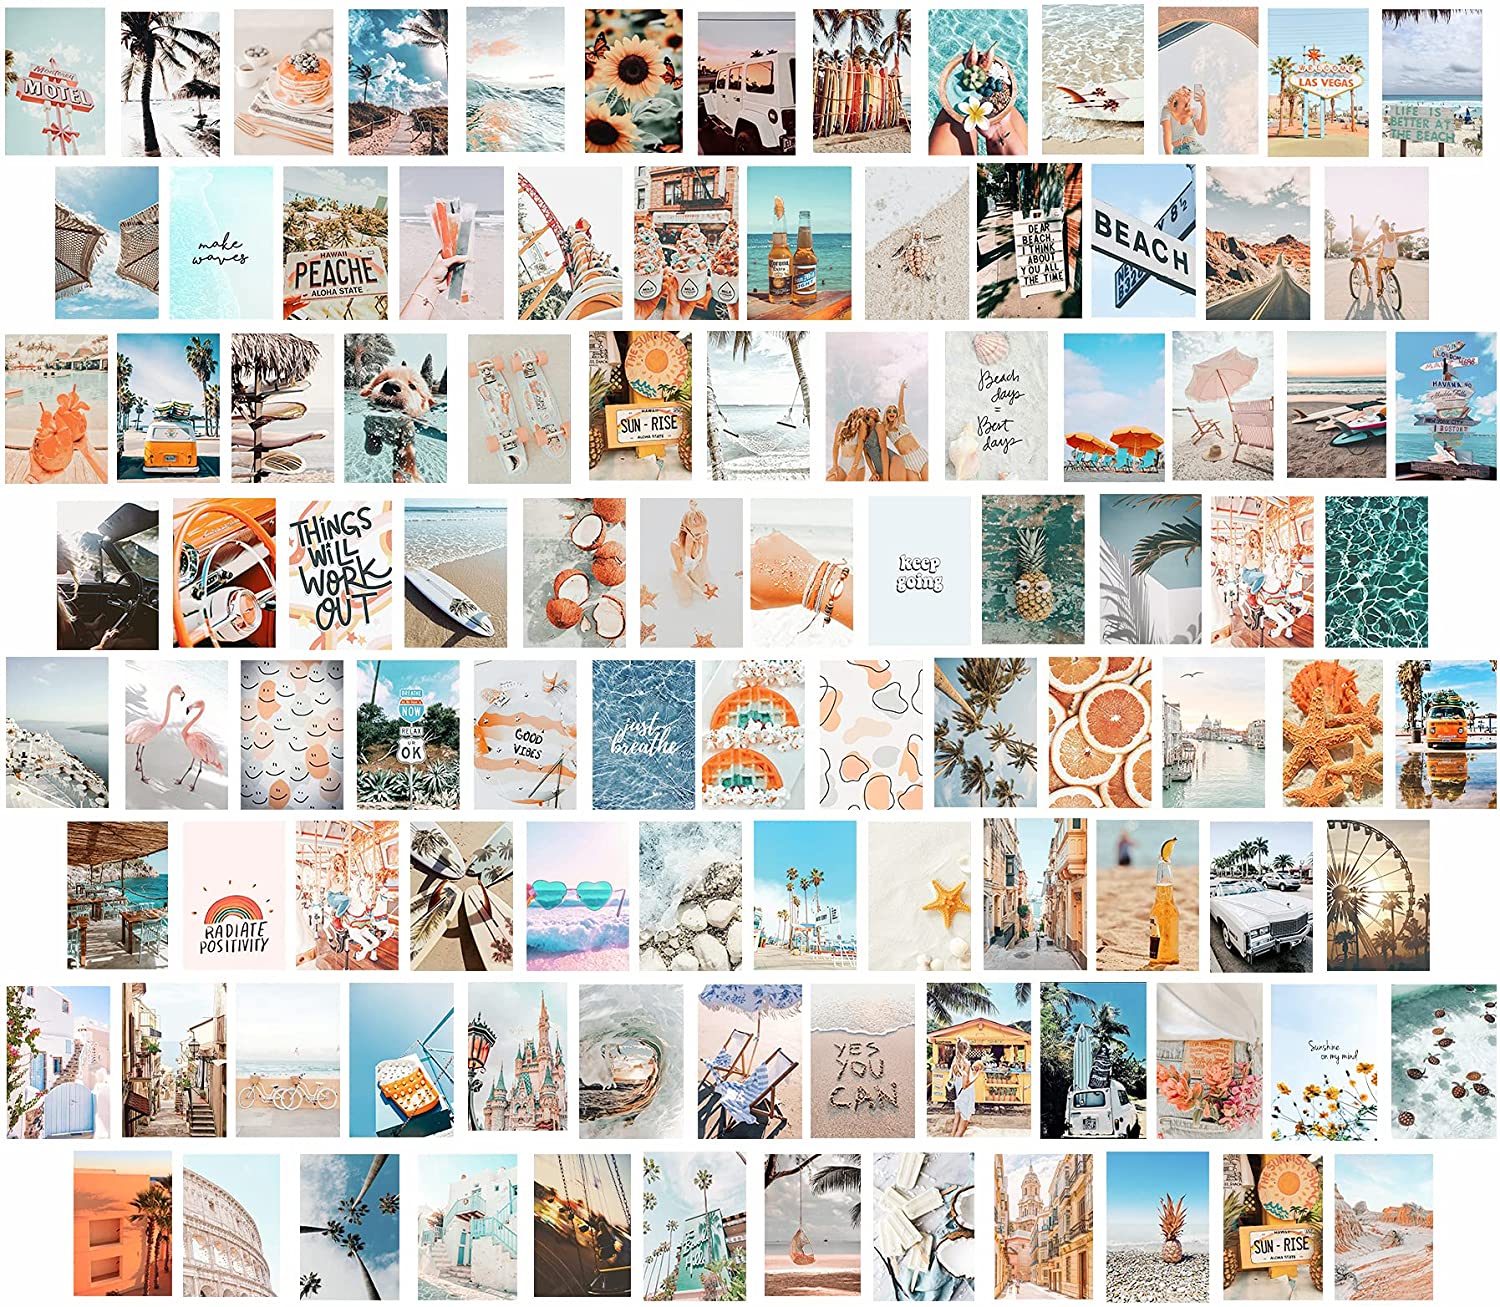 KOSKIMER 100PCS Blue Wall Collage Kit Aesthetic Picture, 100 Set 4x6 Inch, Summer Beach Room Decor Aesthetic, Cute VSCO Posters for Teen Girls, Preppy Bedroom Decor, Vibey Photo Collage Kit for